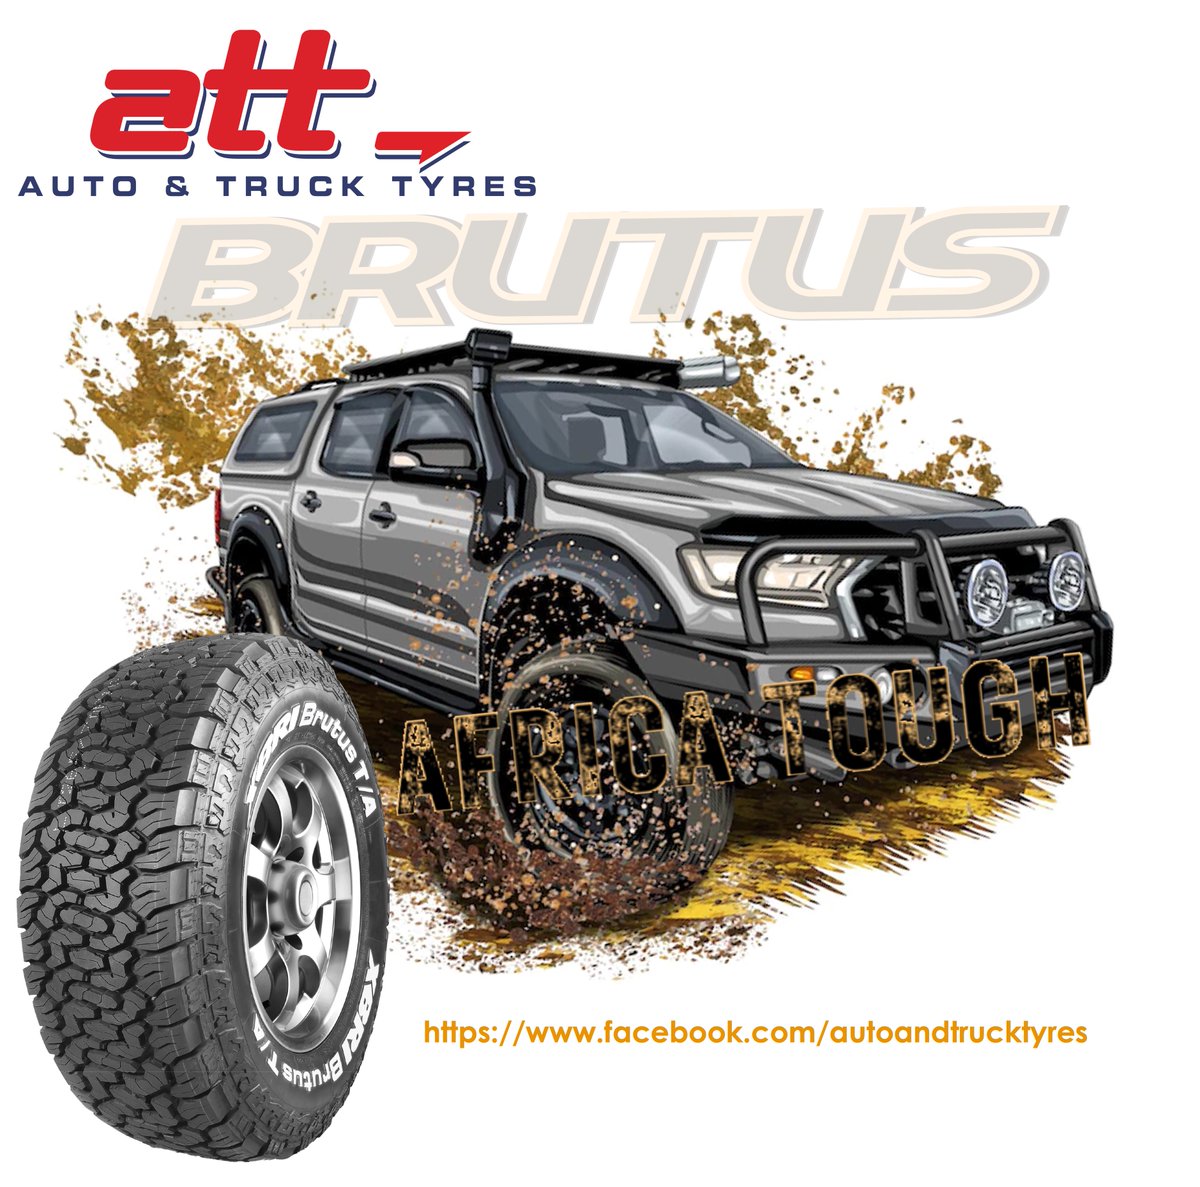 The XBRI Brutus T/A is the perfect partner for your outdoor expeditions. It's time to embrace the wild and embark on unforgettable journeys. Buckle up and let the adventure begin!
#tyres #autoandtrucktyres #tyresupplier #tyreshop #tyrefitting #logistics #4x4 #adventure #offroad